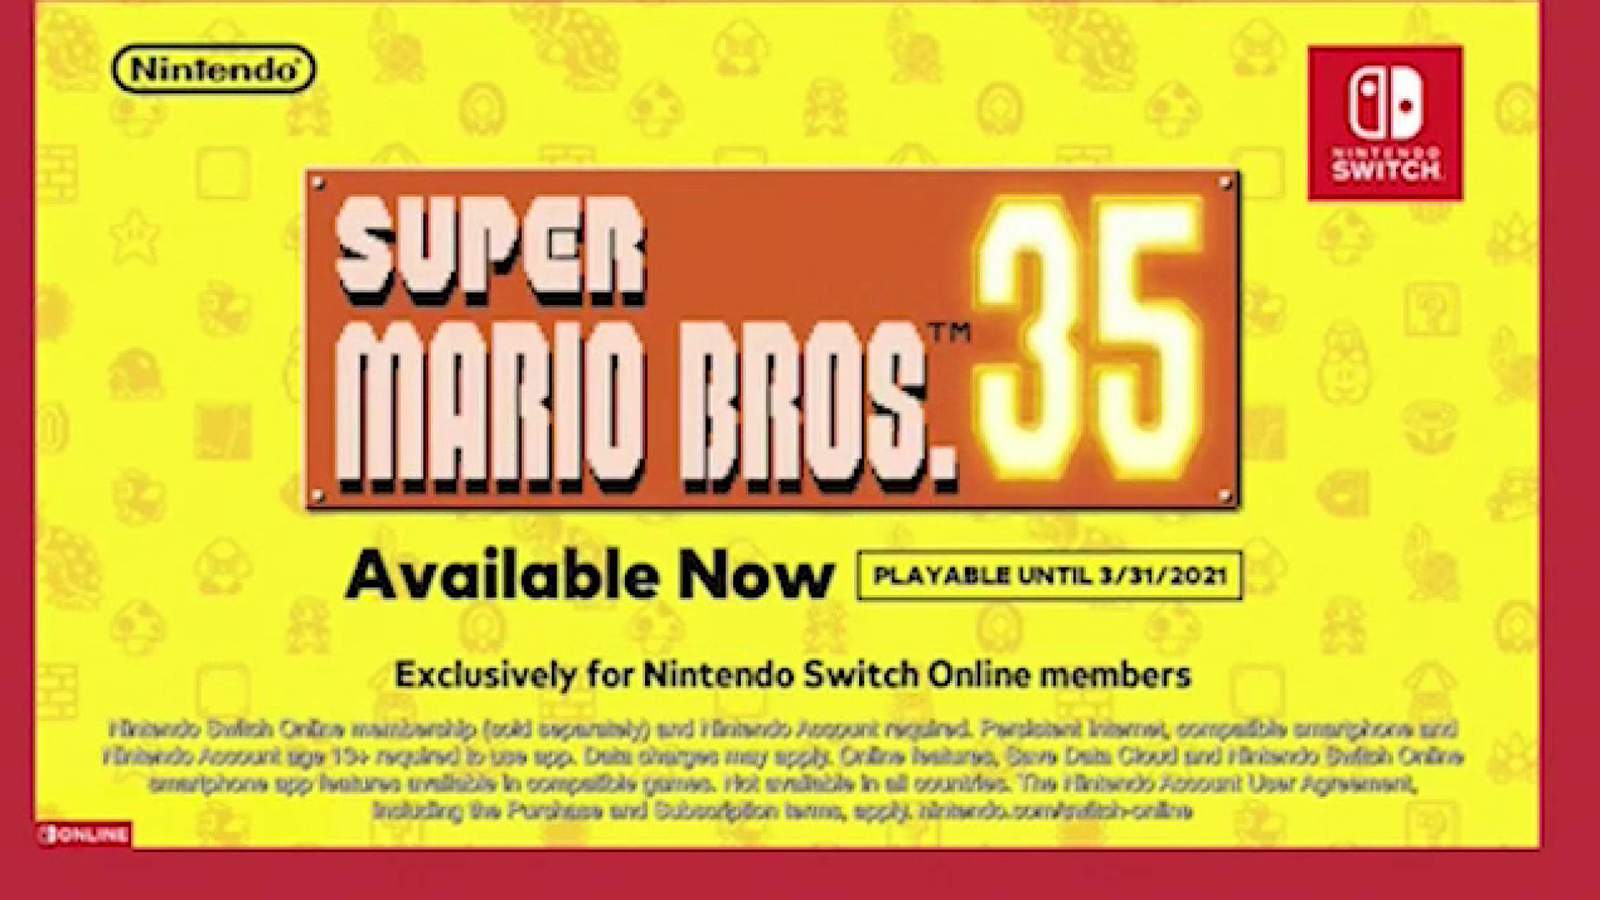 New ‘Super Mario’ game for Nintendo Switch available as free download for limited time with subscription